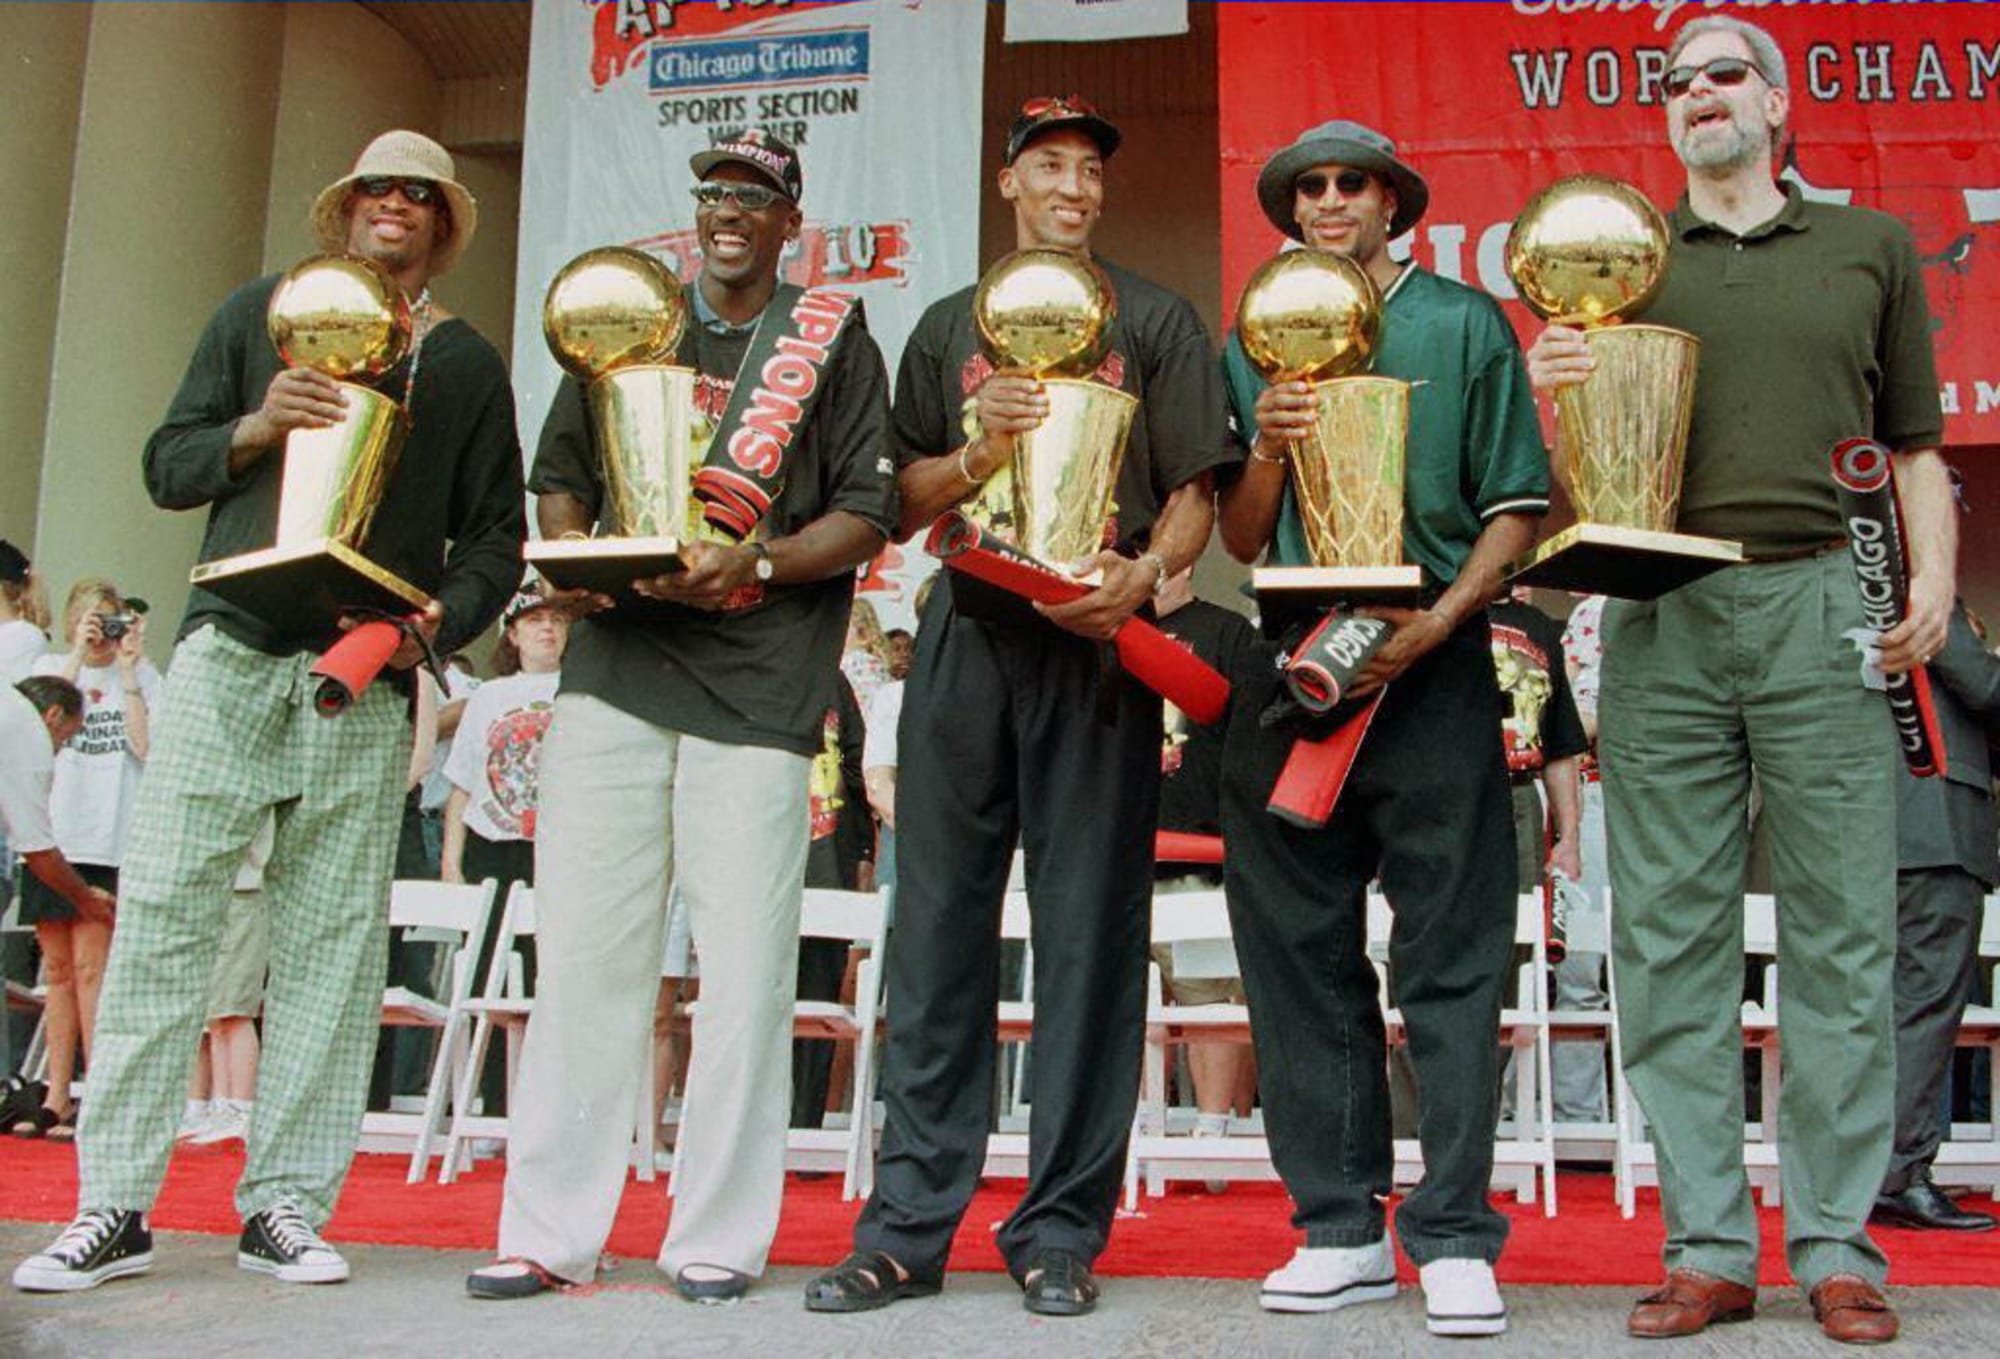 Chicago Bulls: Pippen 'hated' Rodman when they were first teammates